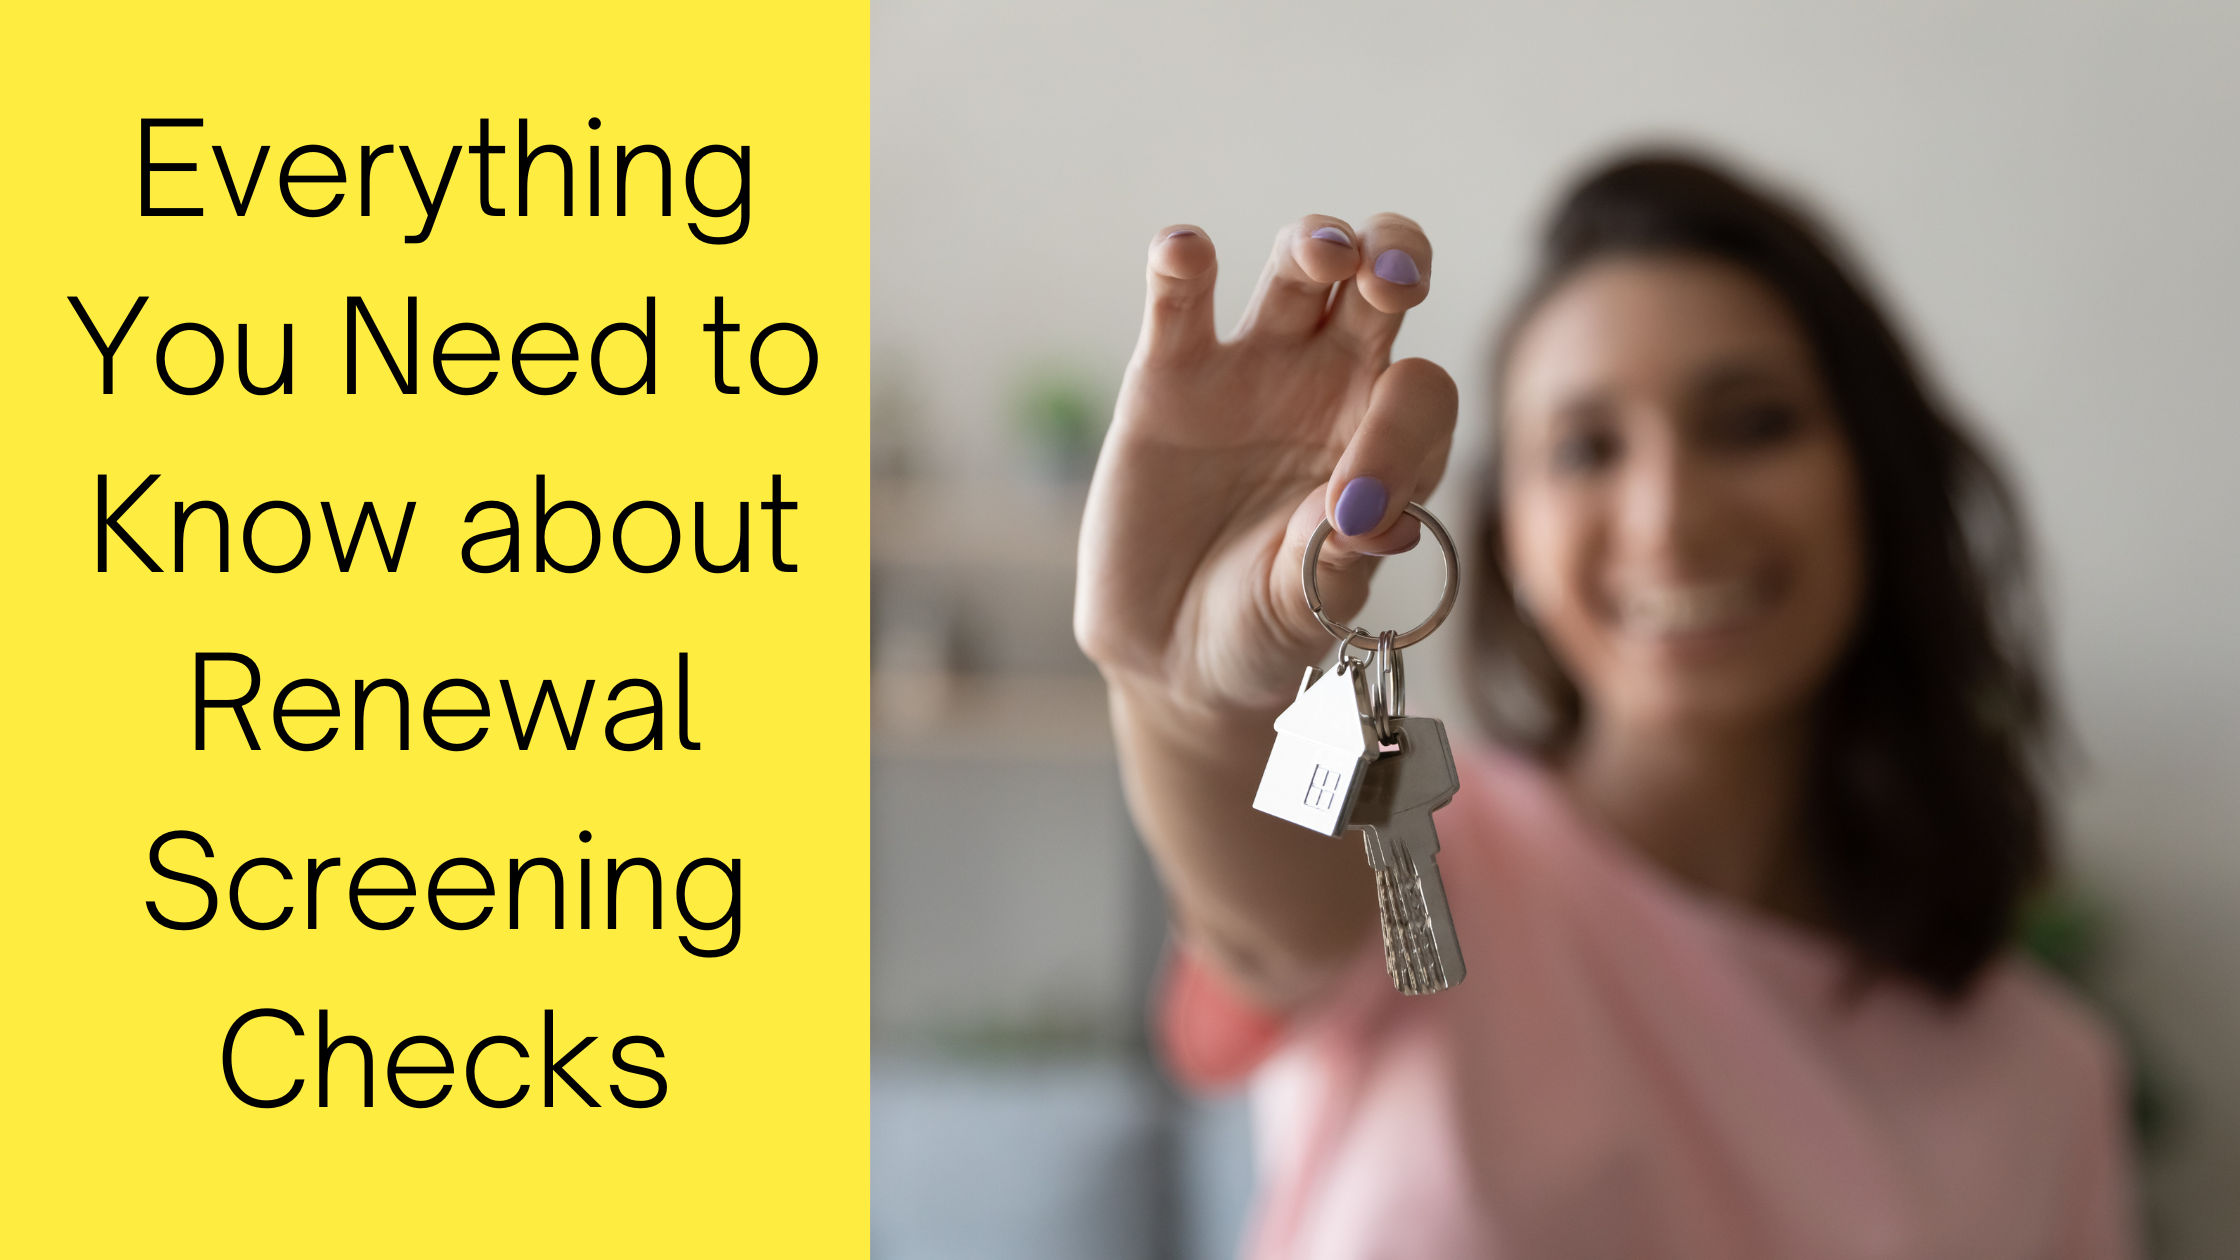 Everything You Need to Know about Renewal Screening Checks